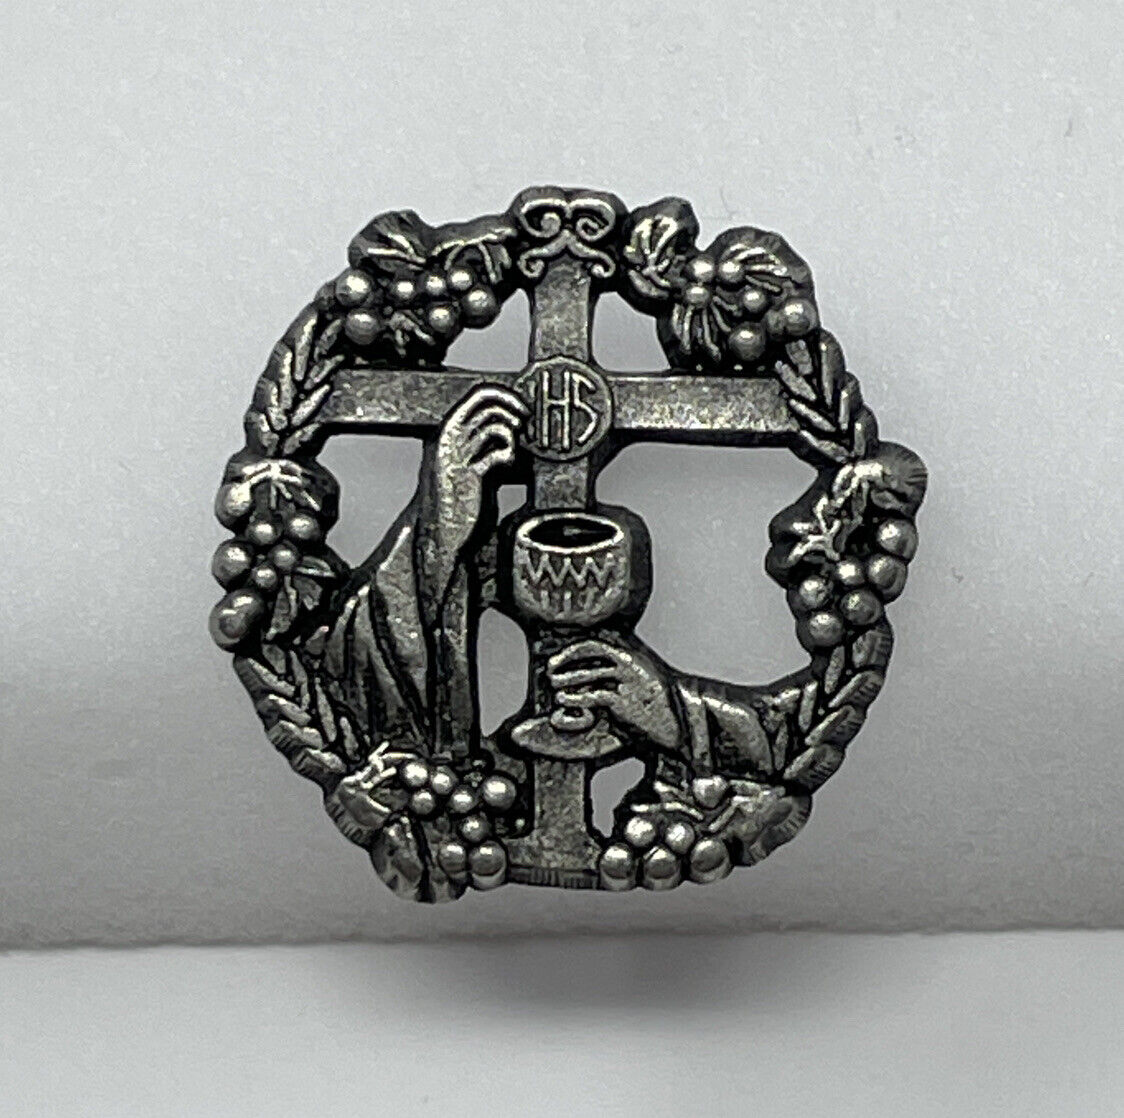 Vintage IHS Motif Branded Silver Tone Pewter Collectible Religious Catholic Pin